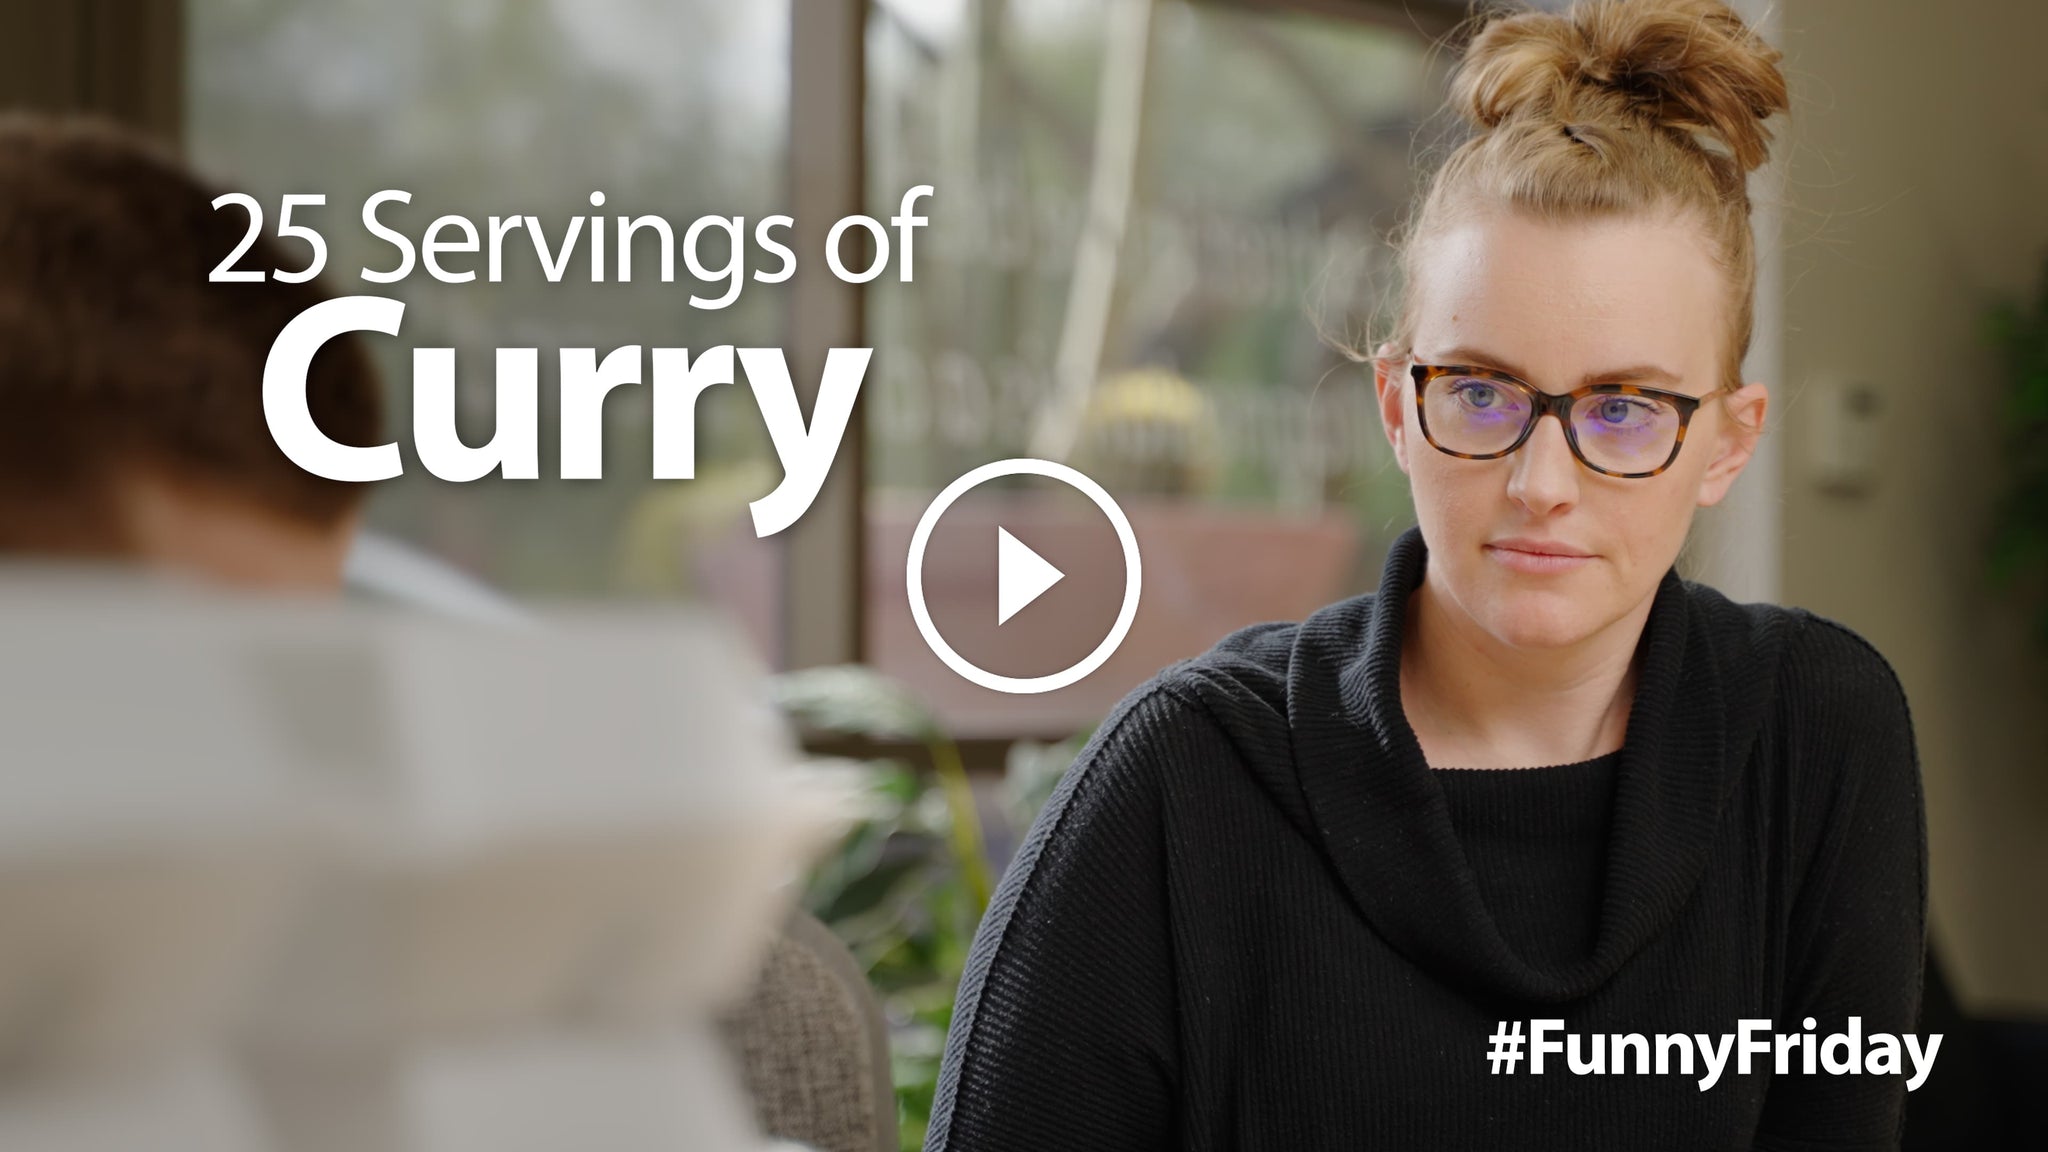 25 Servings of Curry | #FunnyFriday